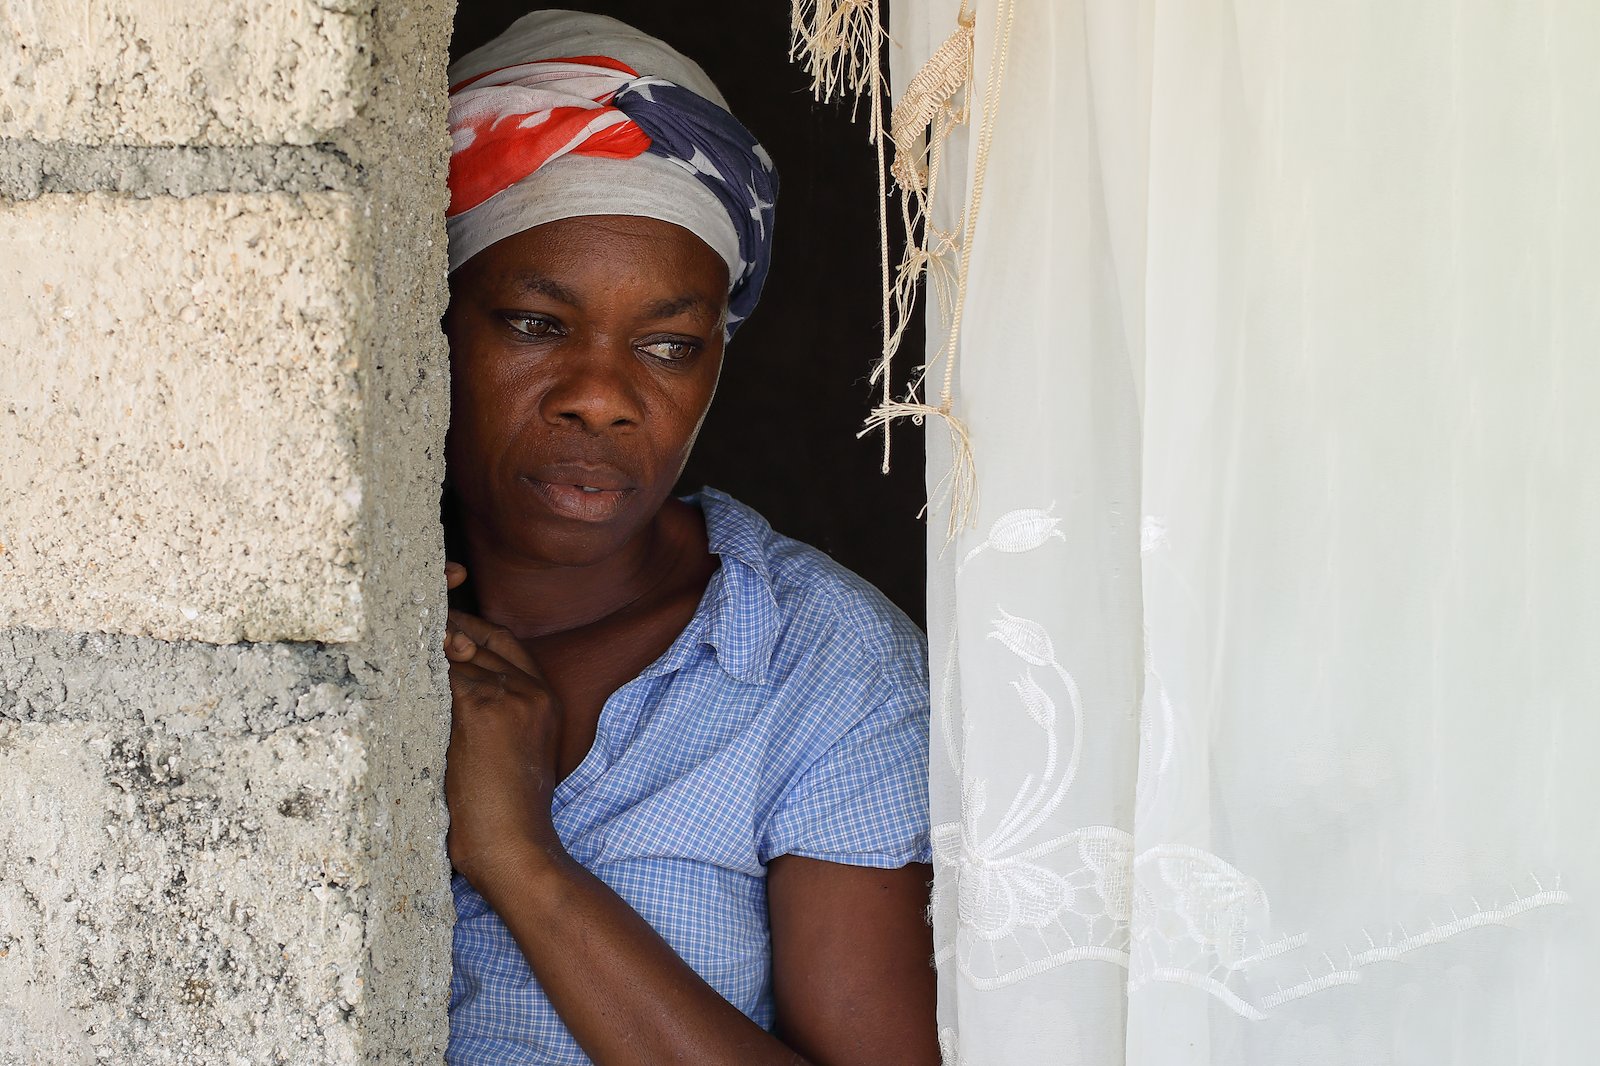 A woman peers out of her residence in Haiti's southern peninsula. Credit: UNOCHA/Christian Cricboom